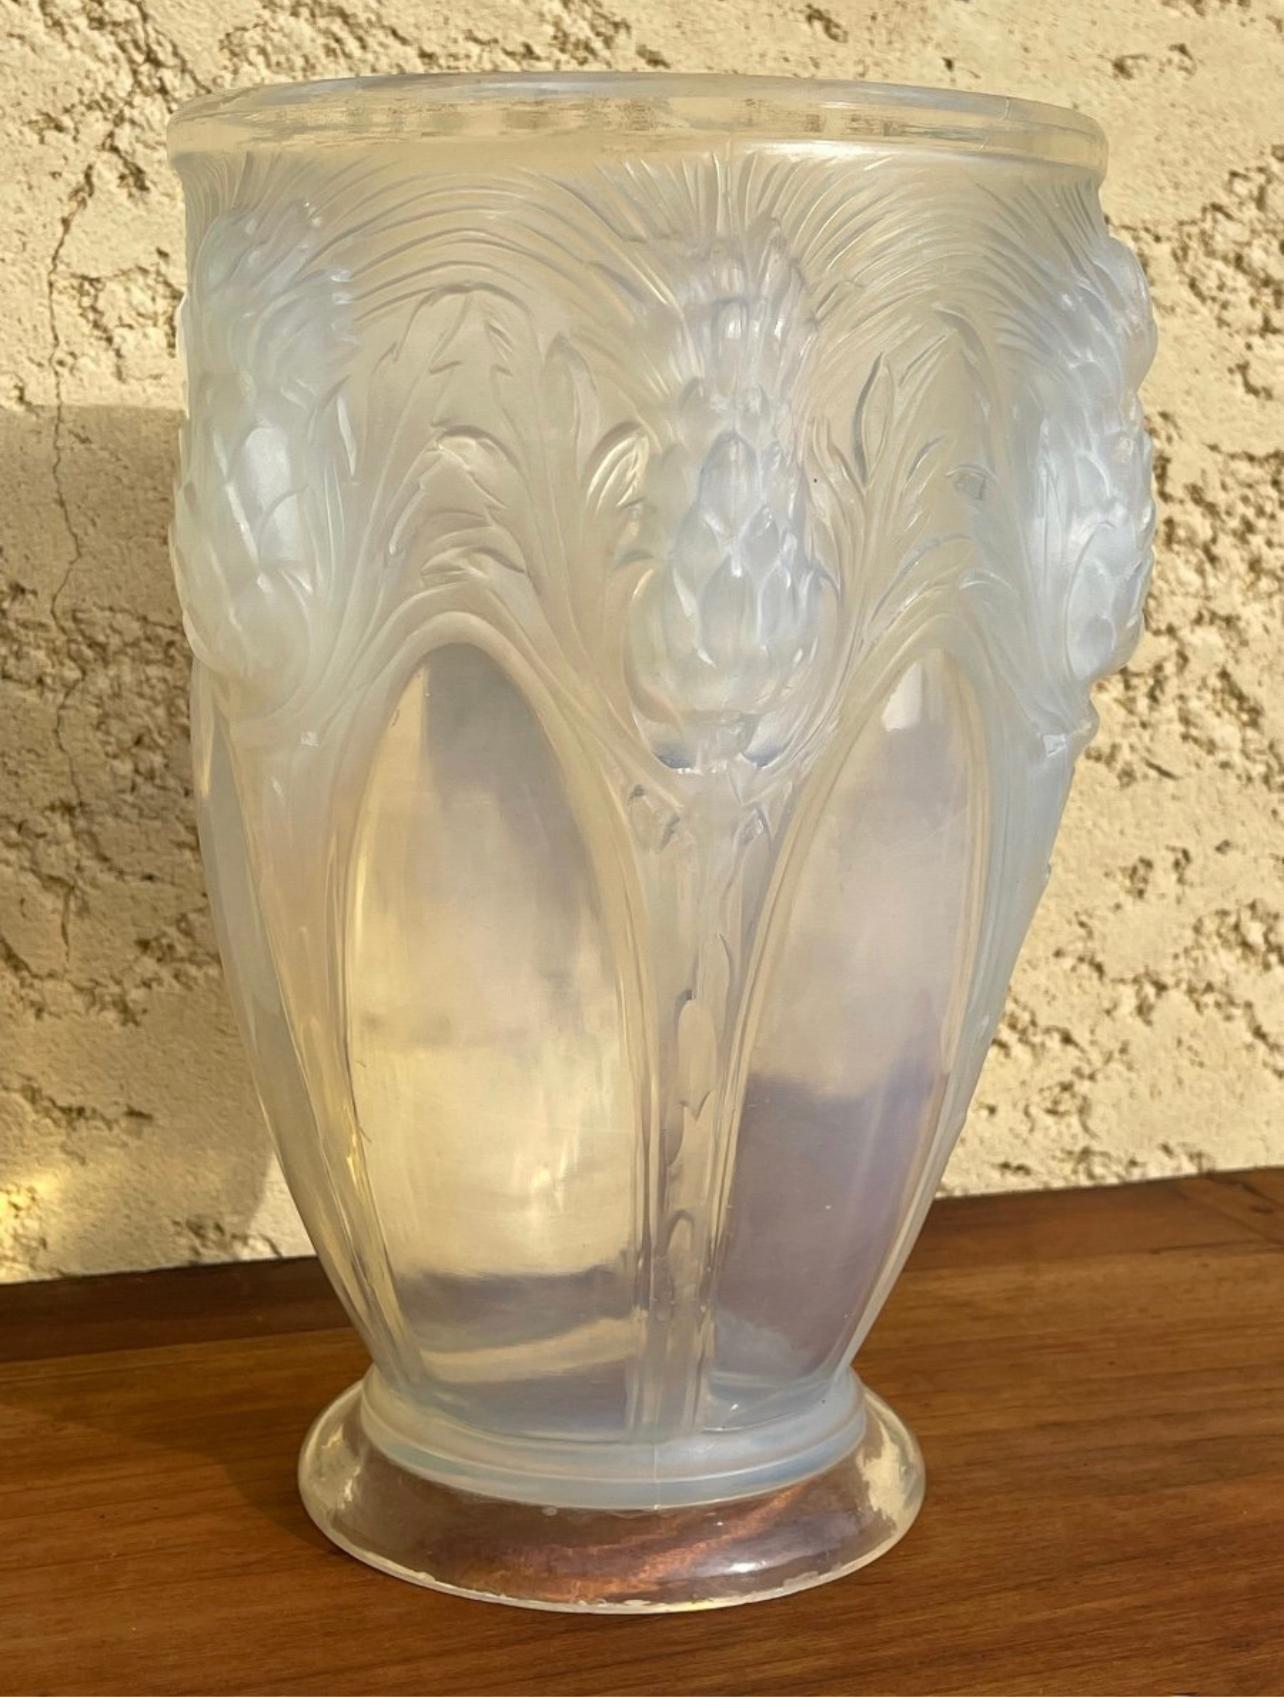 Blue opalescent molded and pressed glass vase decorated with thistles signed Verlys France under the feet of the vase. It is in very good condition .

Dimensions
Height: 25 cm
Neck diameter: 16 cm